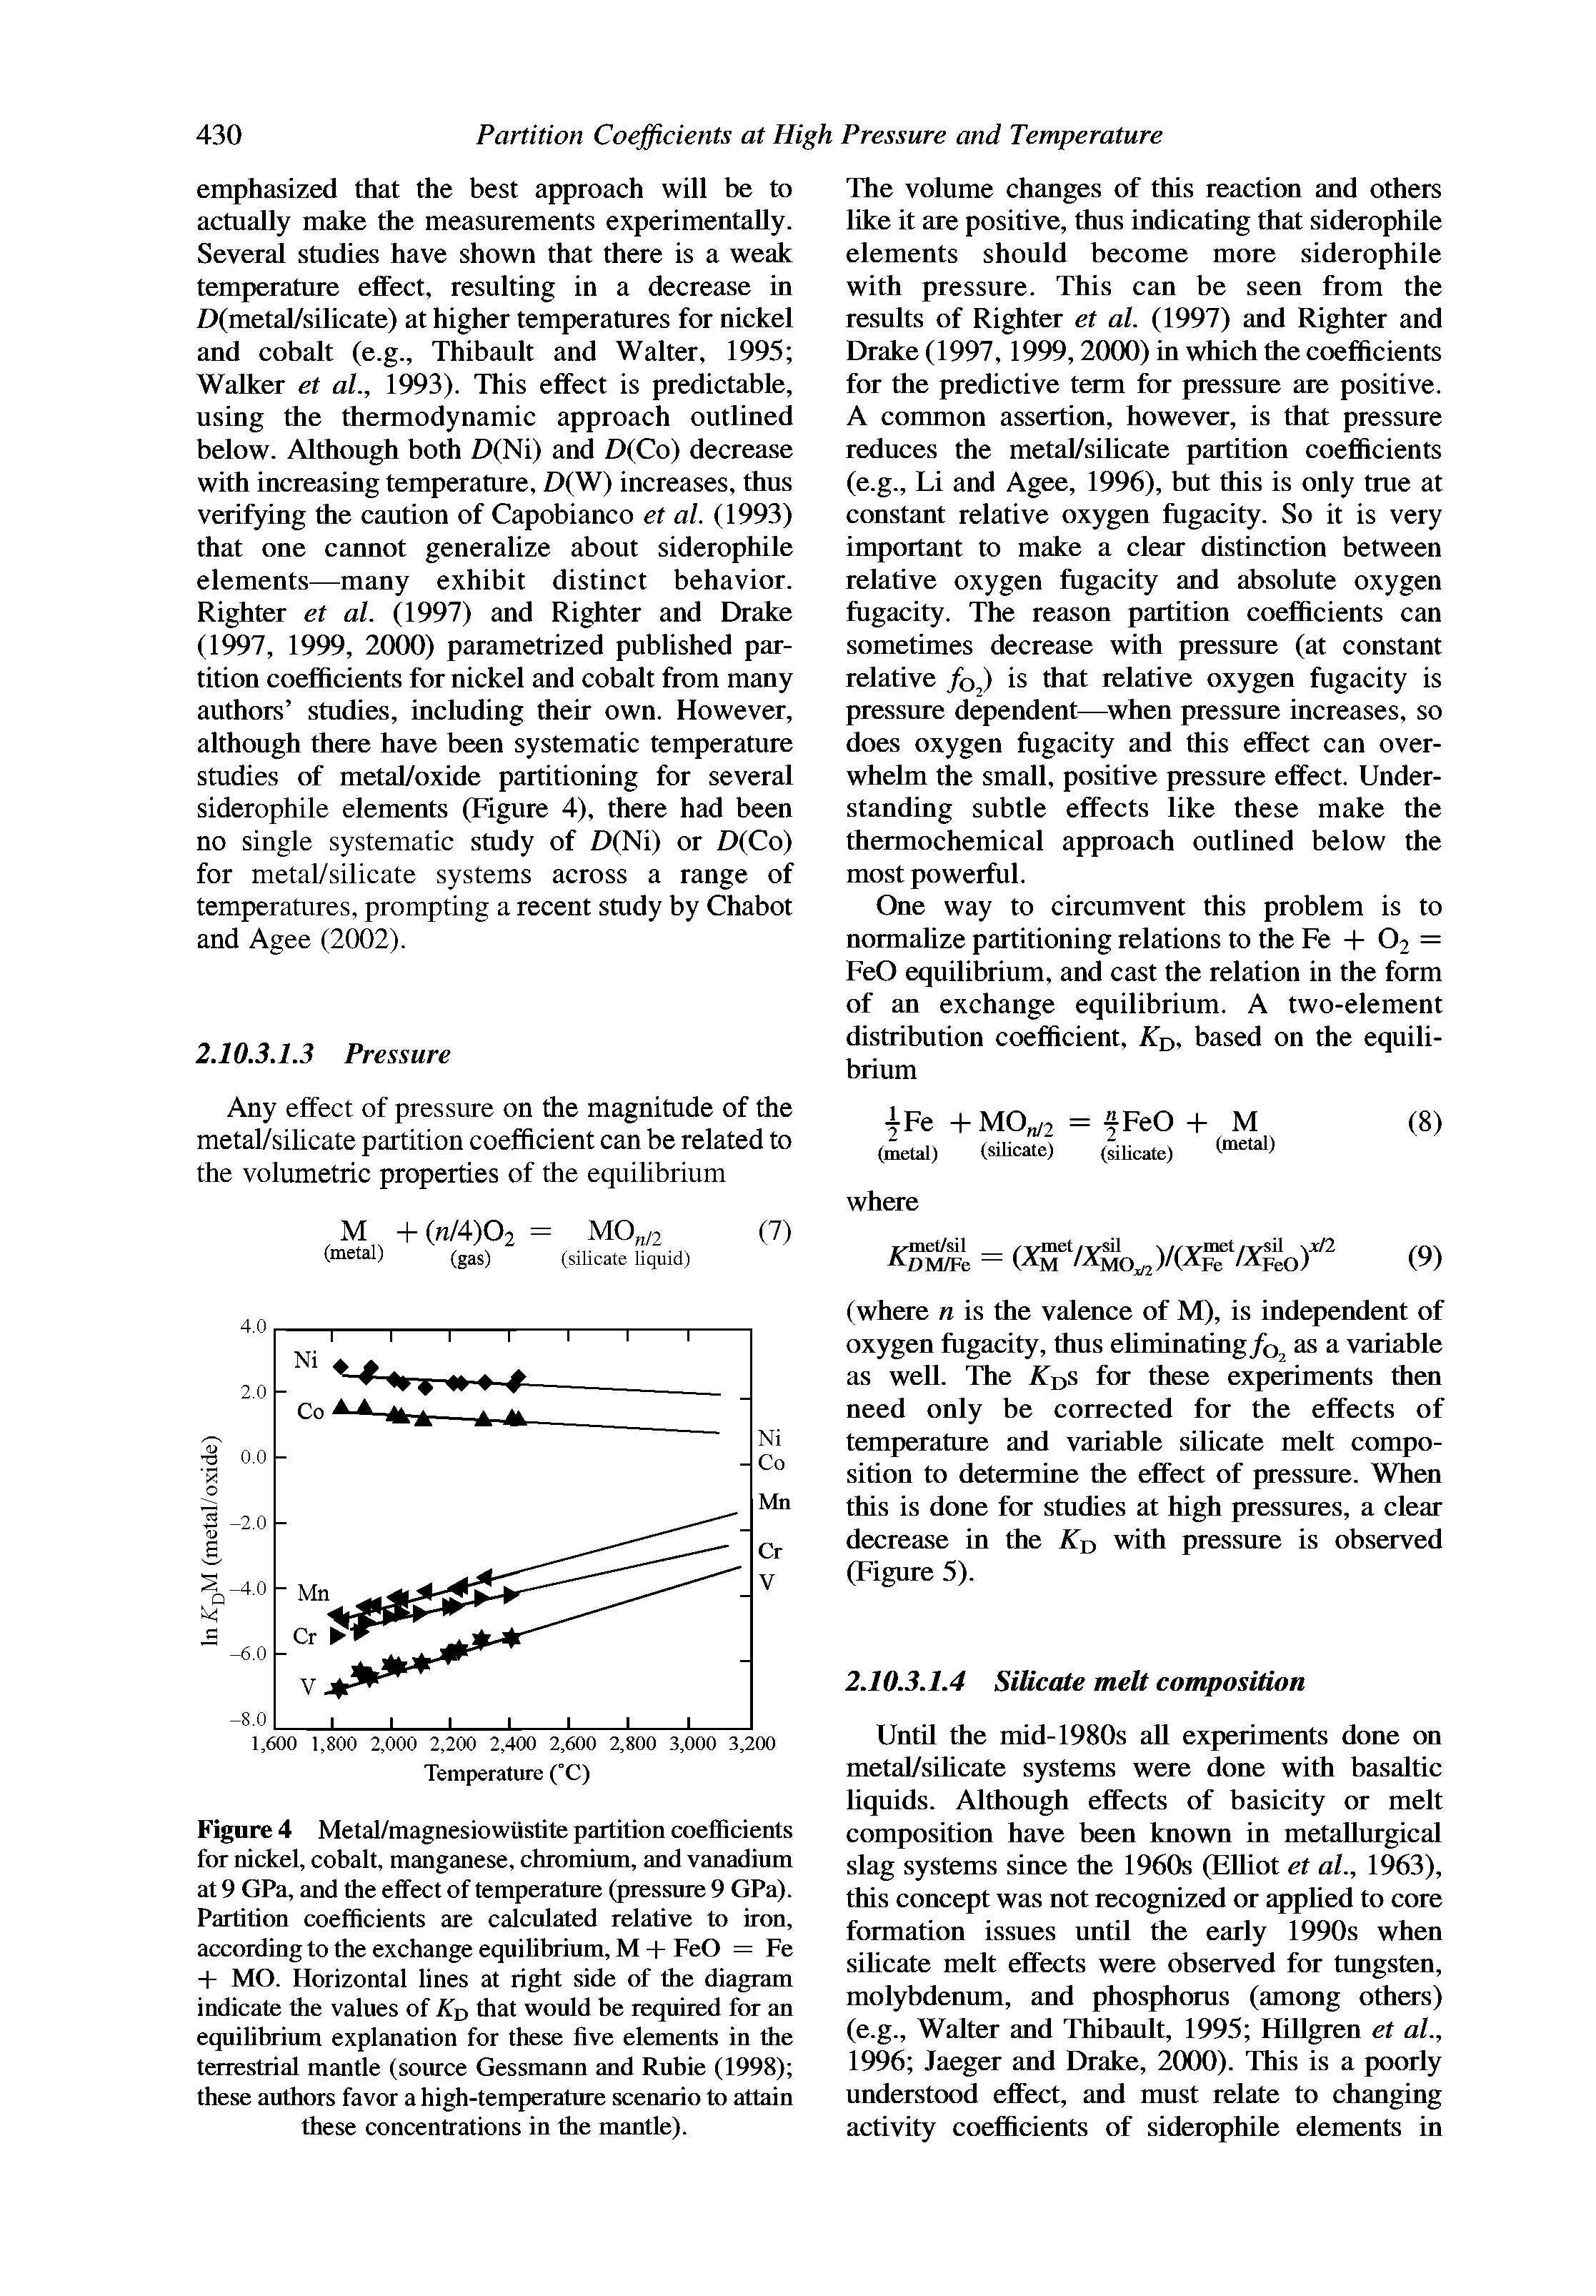 Figure 4 Metal/magnesiowUstite partition coefficients for nickel, cobalt, manganese, chromium, and vanadium at 9 GPa, and the effect of temperature (pressure 9 GPa). Partition coefficients are calculated relative to iron, according to the exchange equihhrium, M - - FeO = Fe + MO. Horizontal lines at right side of the diagram indicate the values of ATd that would he required for an equihhrium explanation for these hve elements in the terrestrial mantle (source Gessmann and Ruhie (1998) these authors favor a high-temperature scenario to attain these concentrations in the mantle).